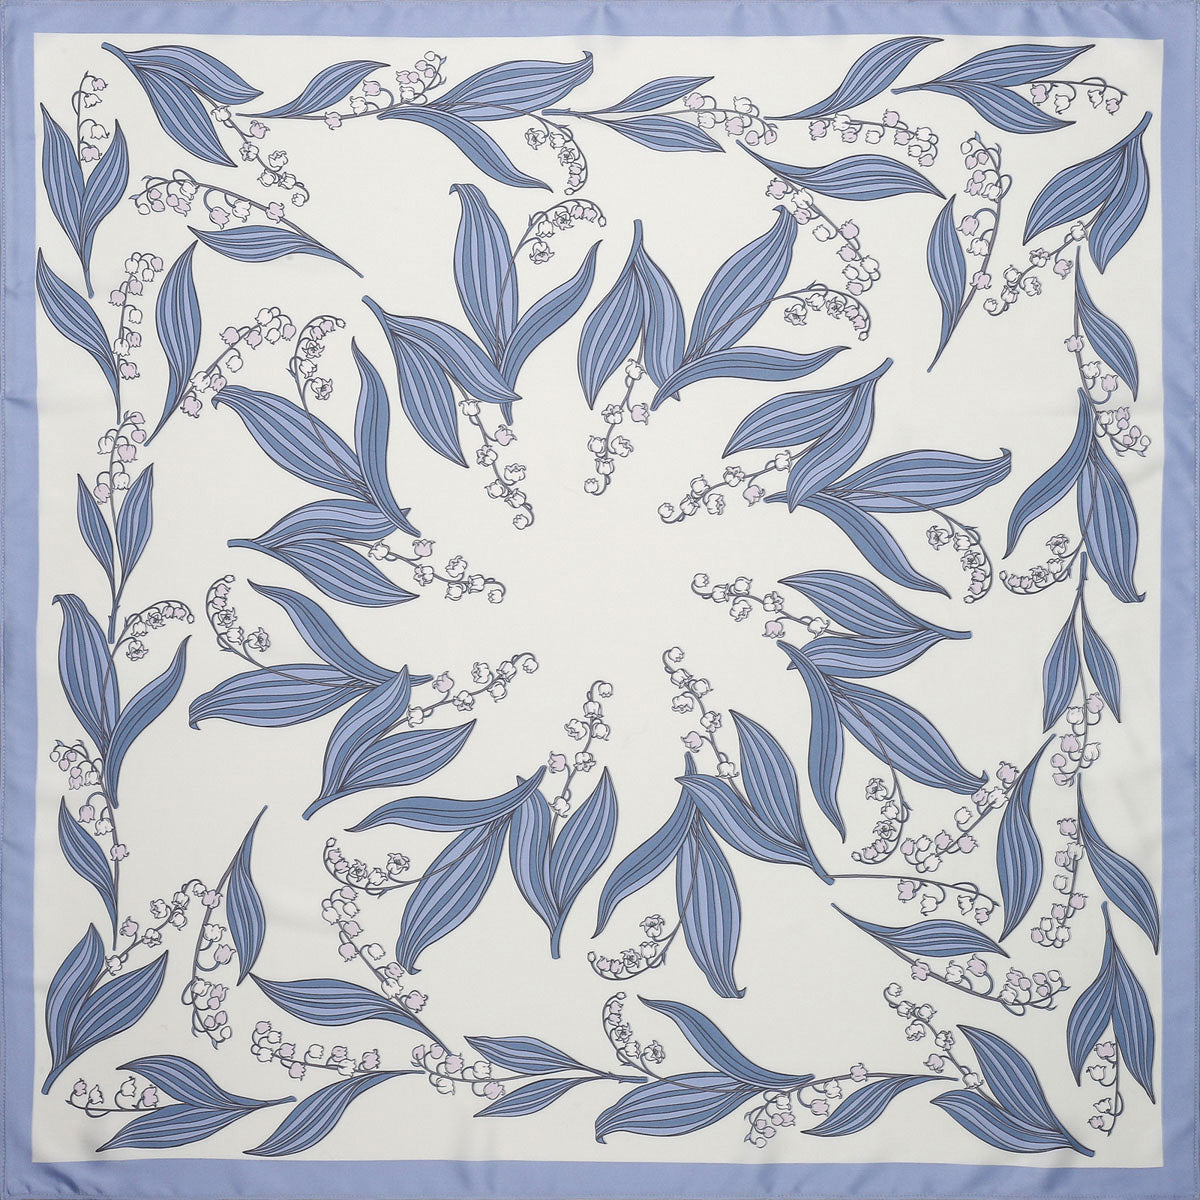 Selenichast Lily Of The Valley Silk Scarf